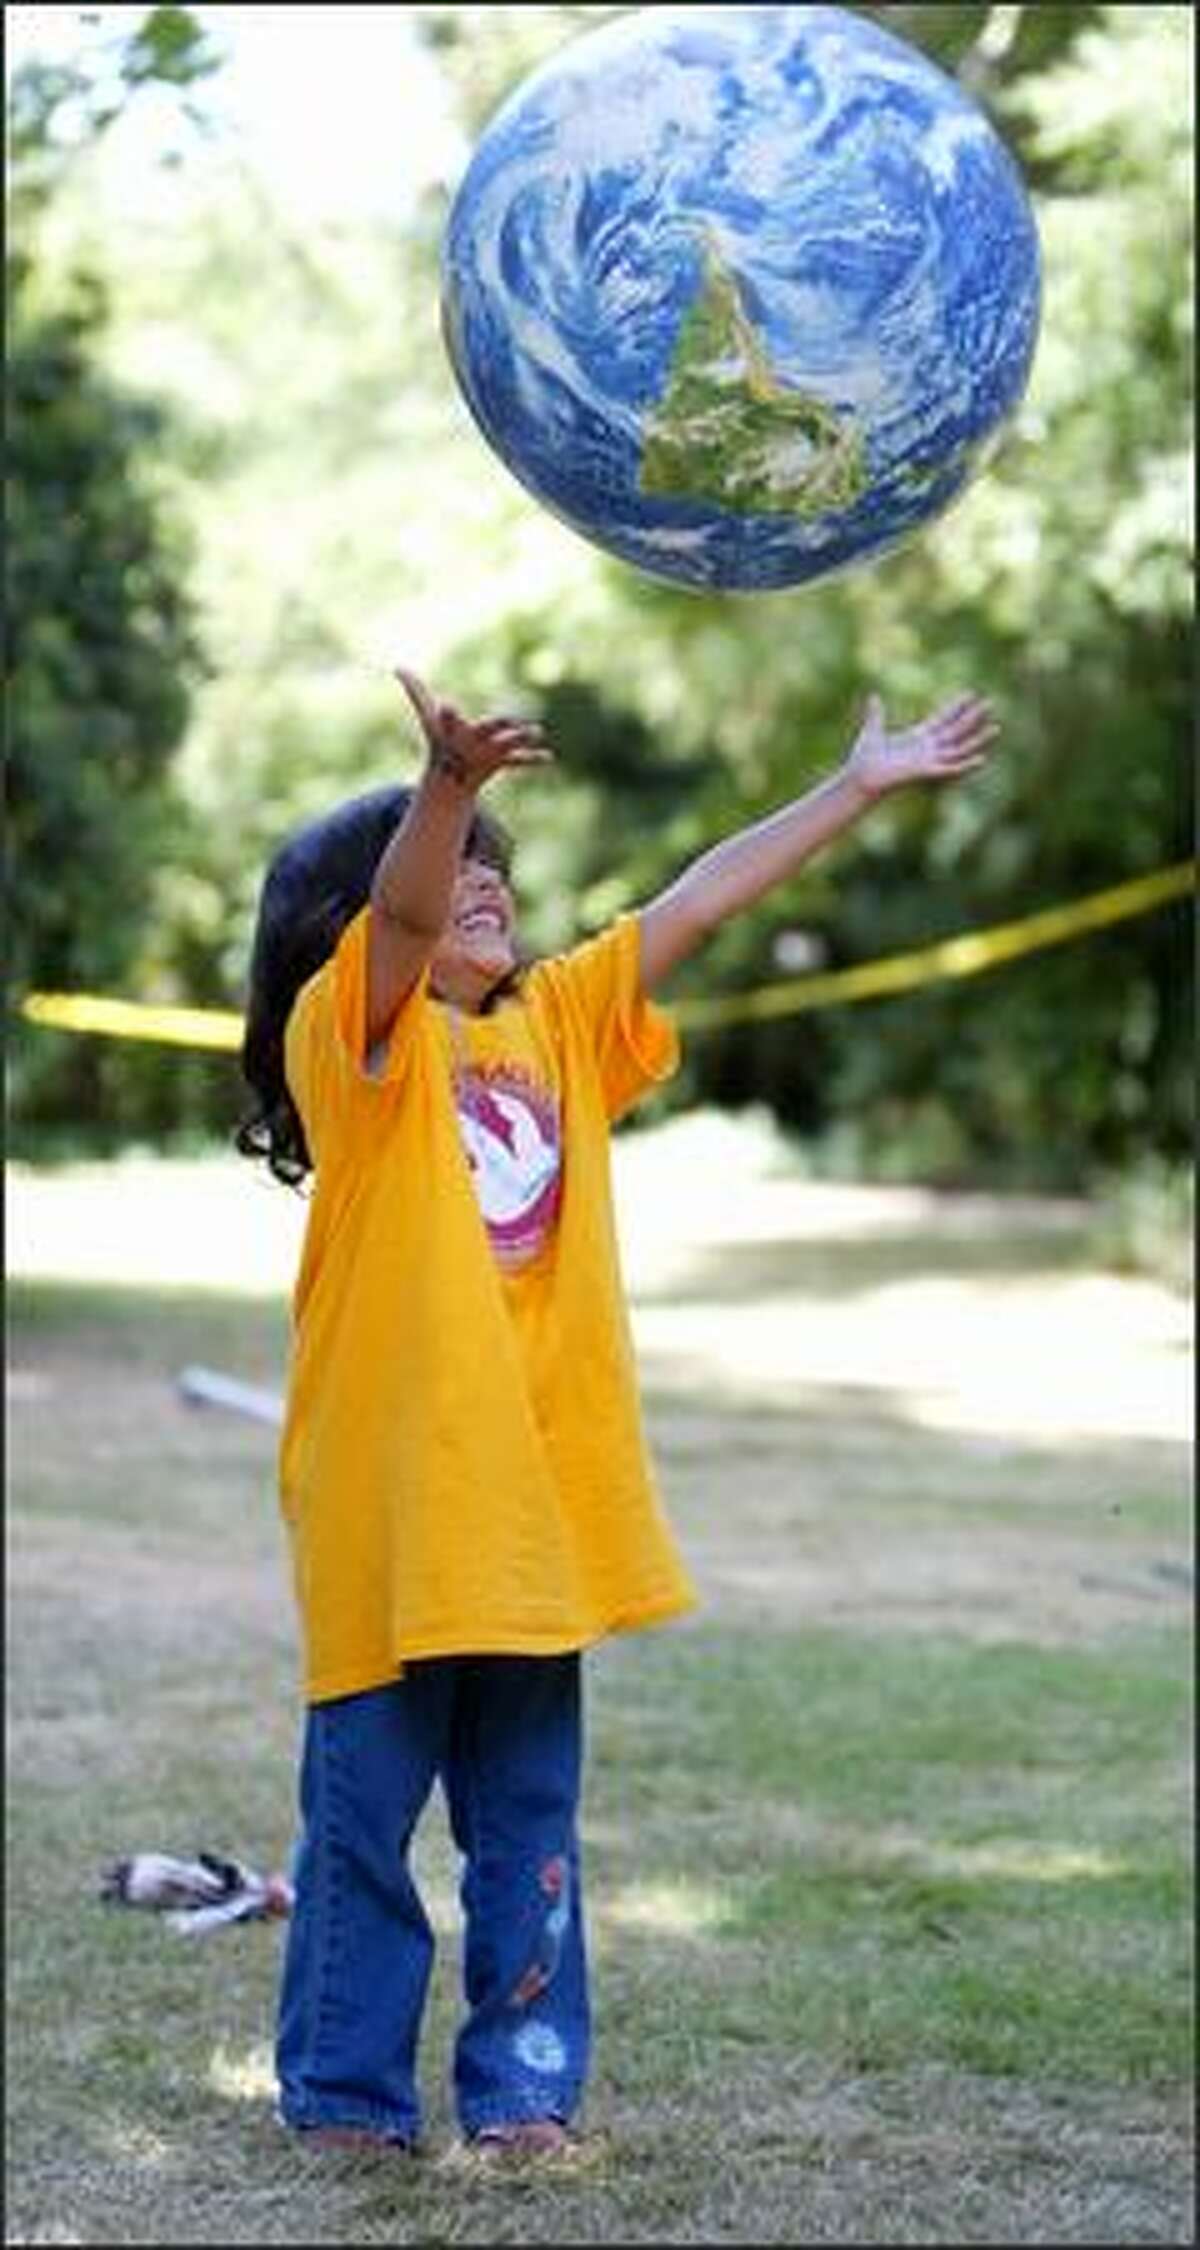 Aliyah Alothaimeen, 5, catches an inflatable globe during Middle East Peace Camp at the home of local peace activist and philanthropist Kay Bullitt on Wednesday,